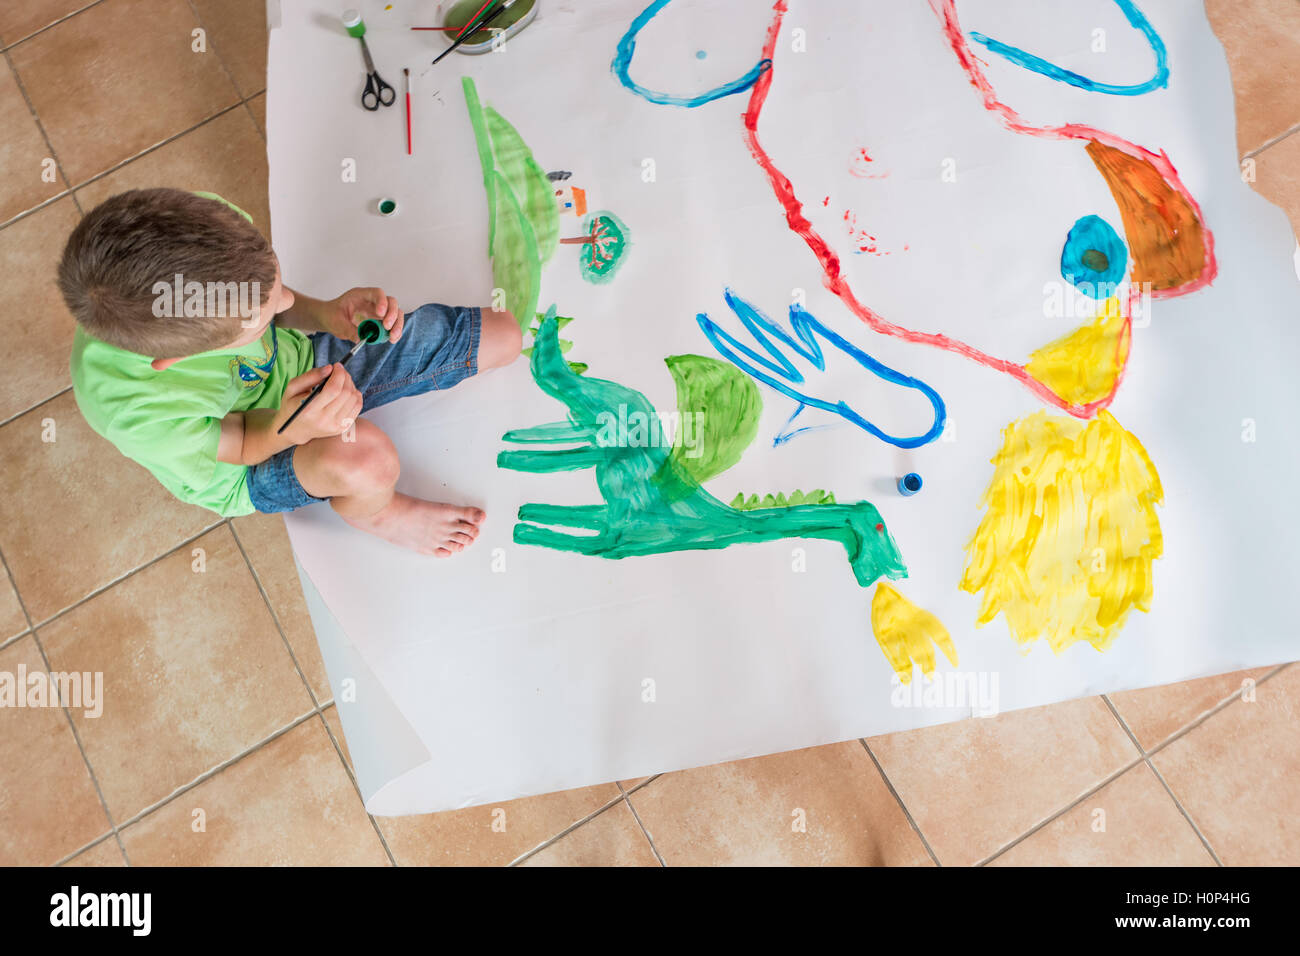 https://c8.alamy.com/comp/H0P4HG/a-boy-painting-a-picture-on-a-big-piece-of-paper-H0P4HG.jpg